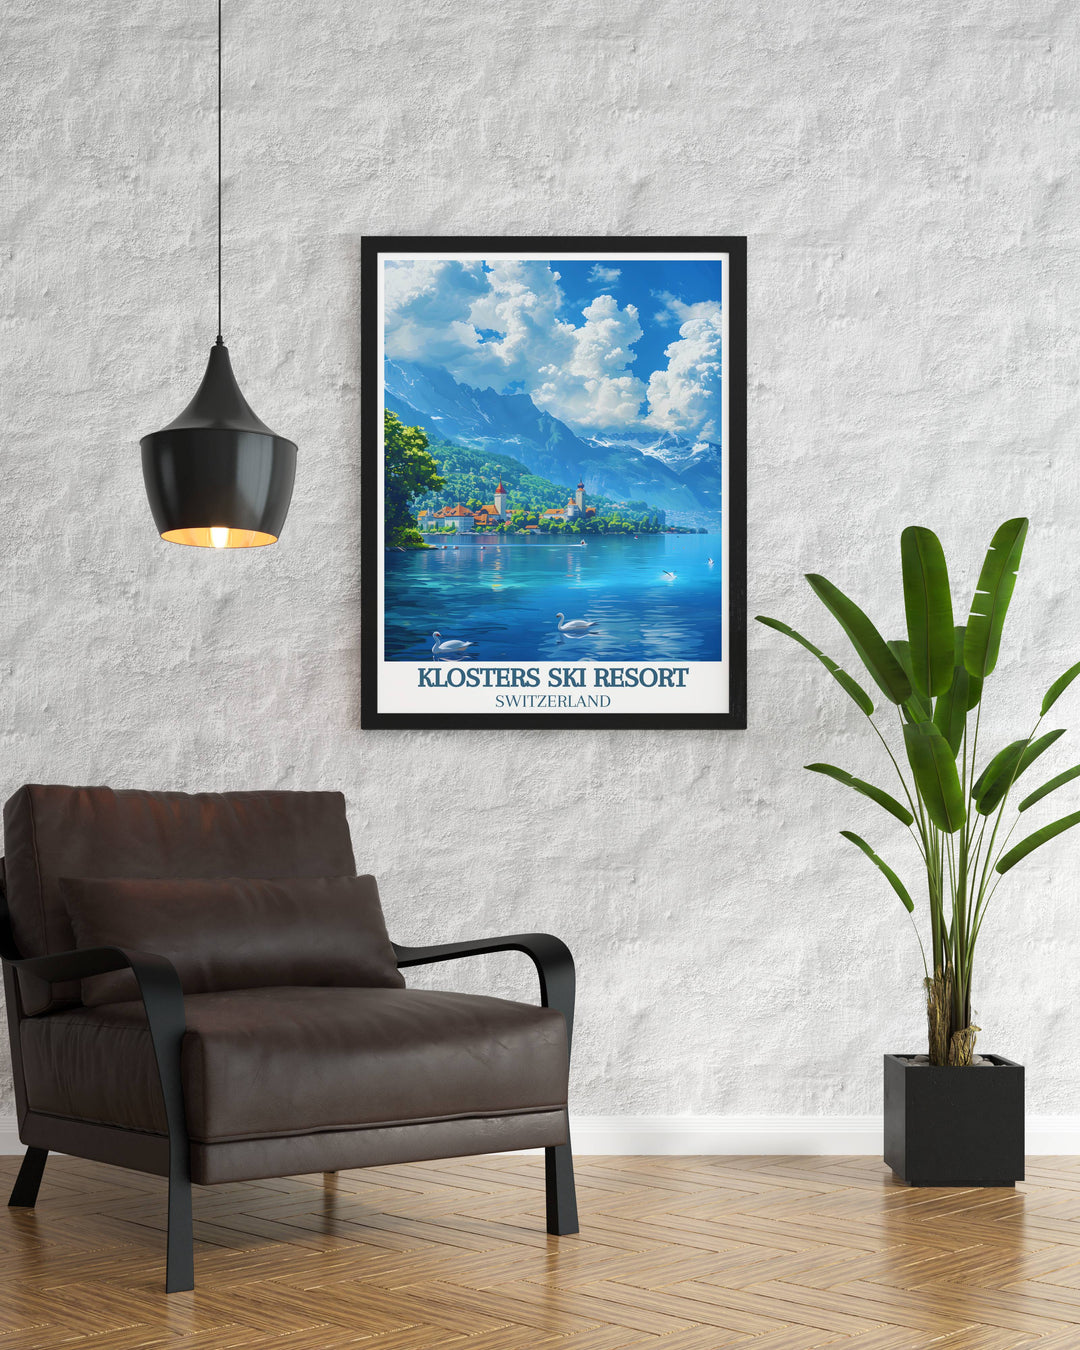 Delight in the tranquil beauty of Lake Geneva with our vintage travel print. This Lake Geneva poster is ideal for home decor capturing the scenic landscapes and peaceful atmosphere of one of Switzerlands most famous lakes